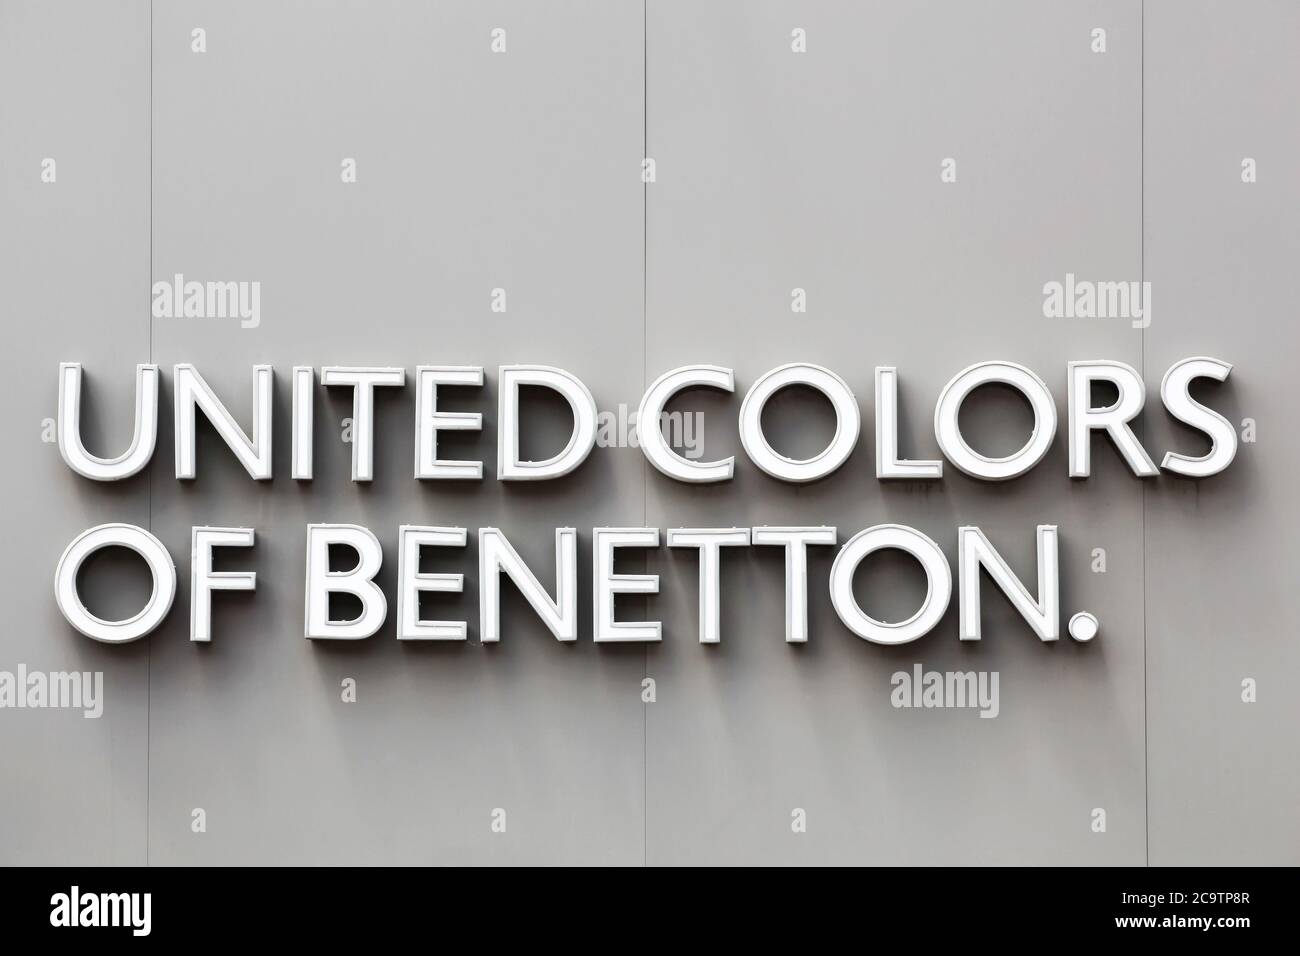 Benetton Group High Resolution Stock Photography and Images - Alamy